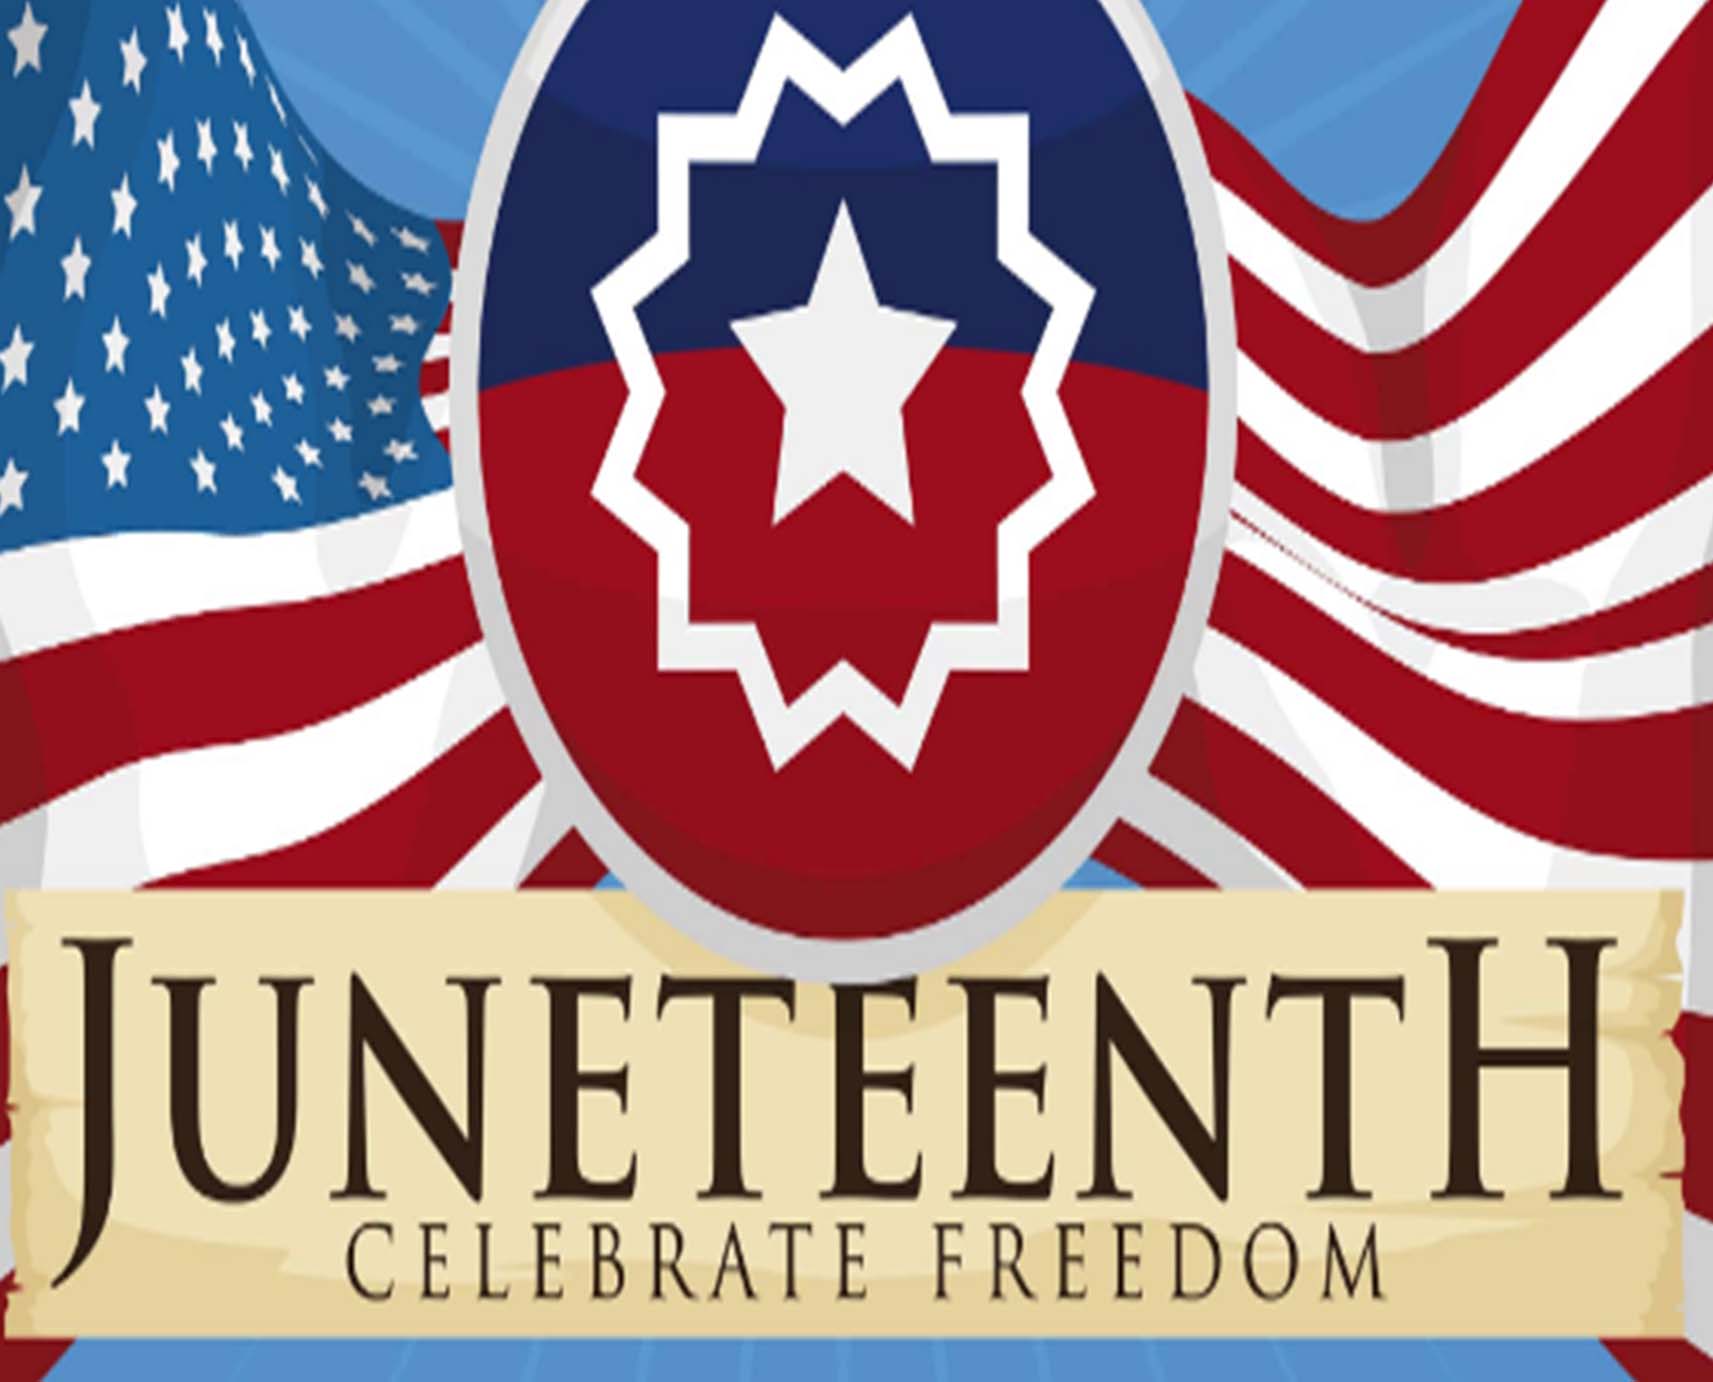 Juneteenth in the United States